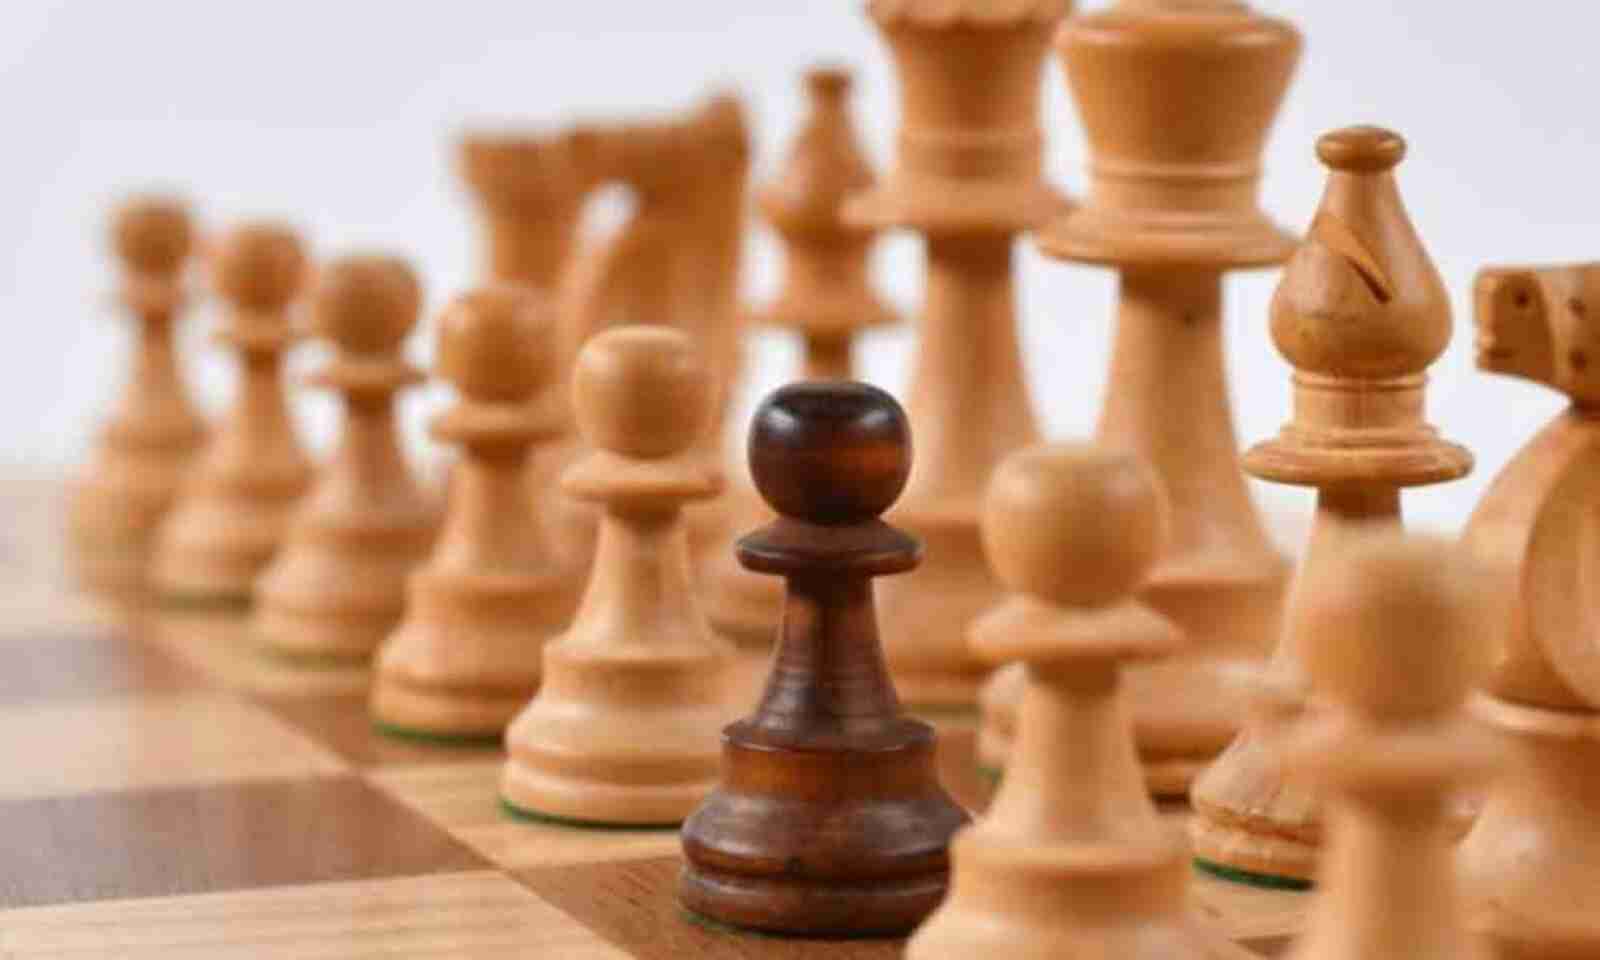 India to host FIDE Chess Olympiad 2022 in Chennai